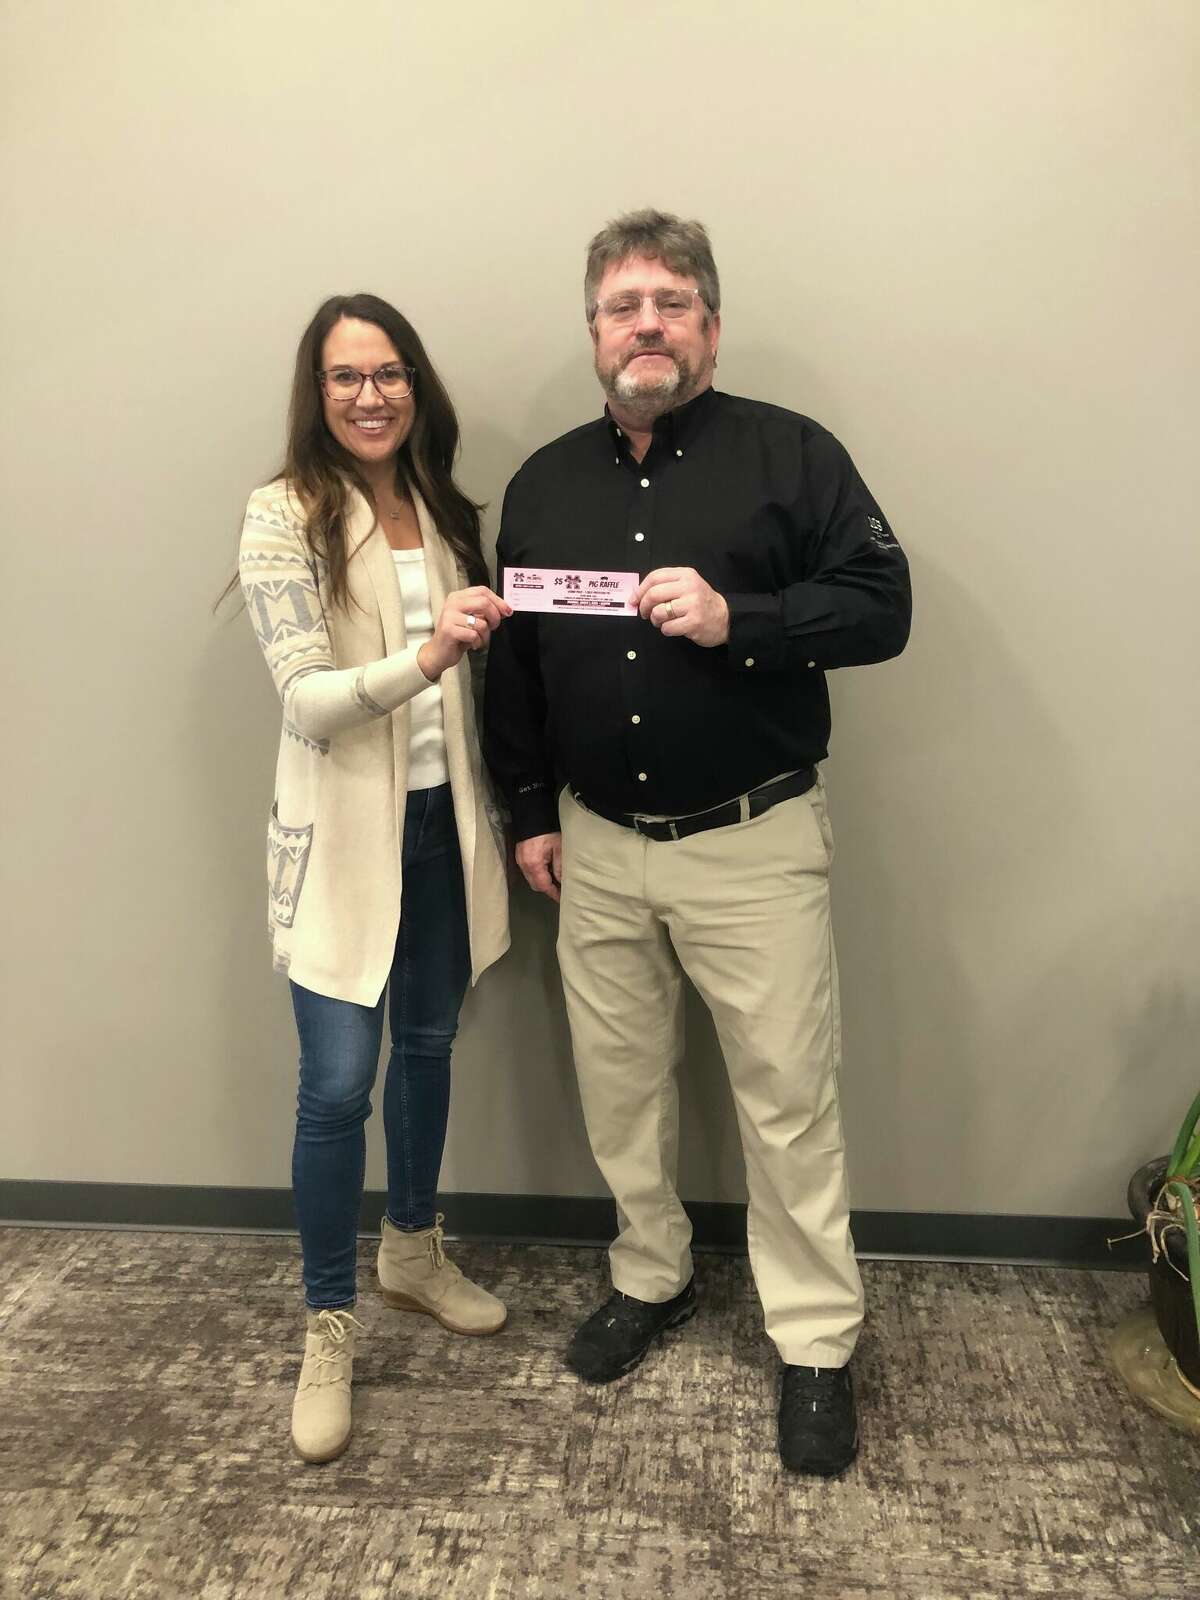 Stacie Bytwork, the President of the Manistee Area Chamber of Commerce purchases a “Pig Raffle” ticket from 350 Club President, Mark Sandstedt. 